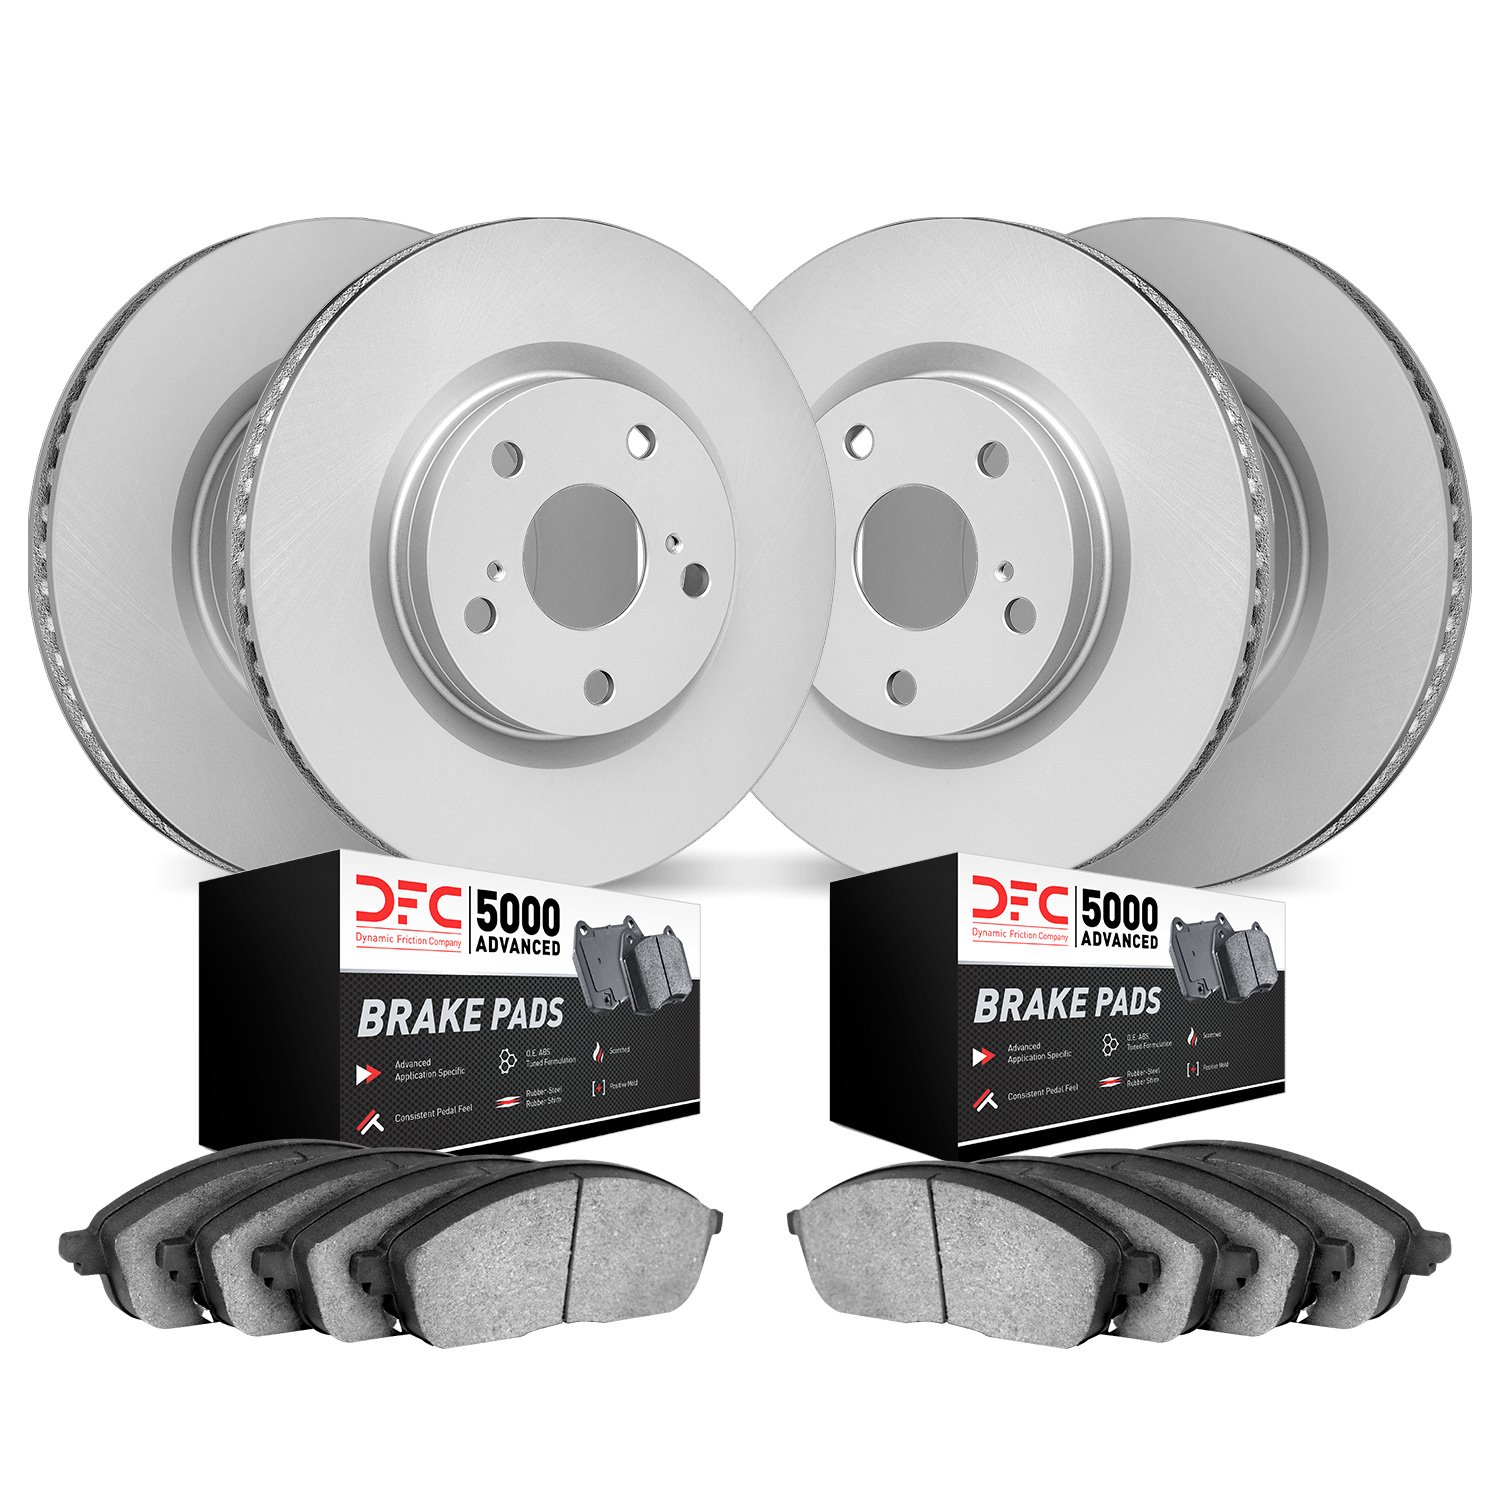 4504-63090 Geospec Brake Rotors w/5000 Advanced Brake Pads Kit, 2014-2019 Mercedes-Benz, Position: Front and Rear